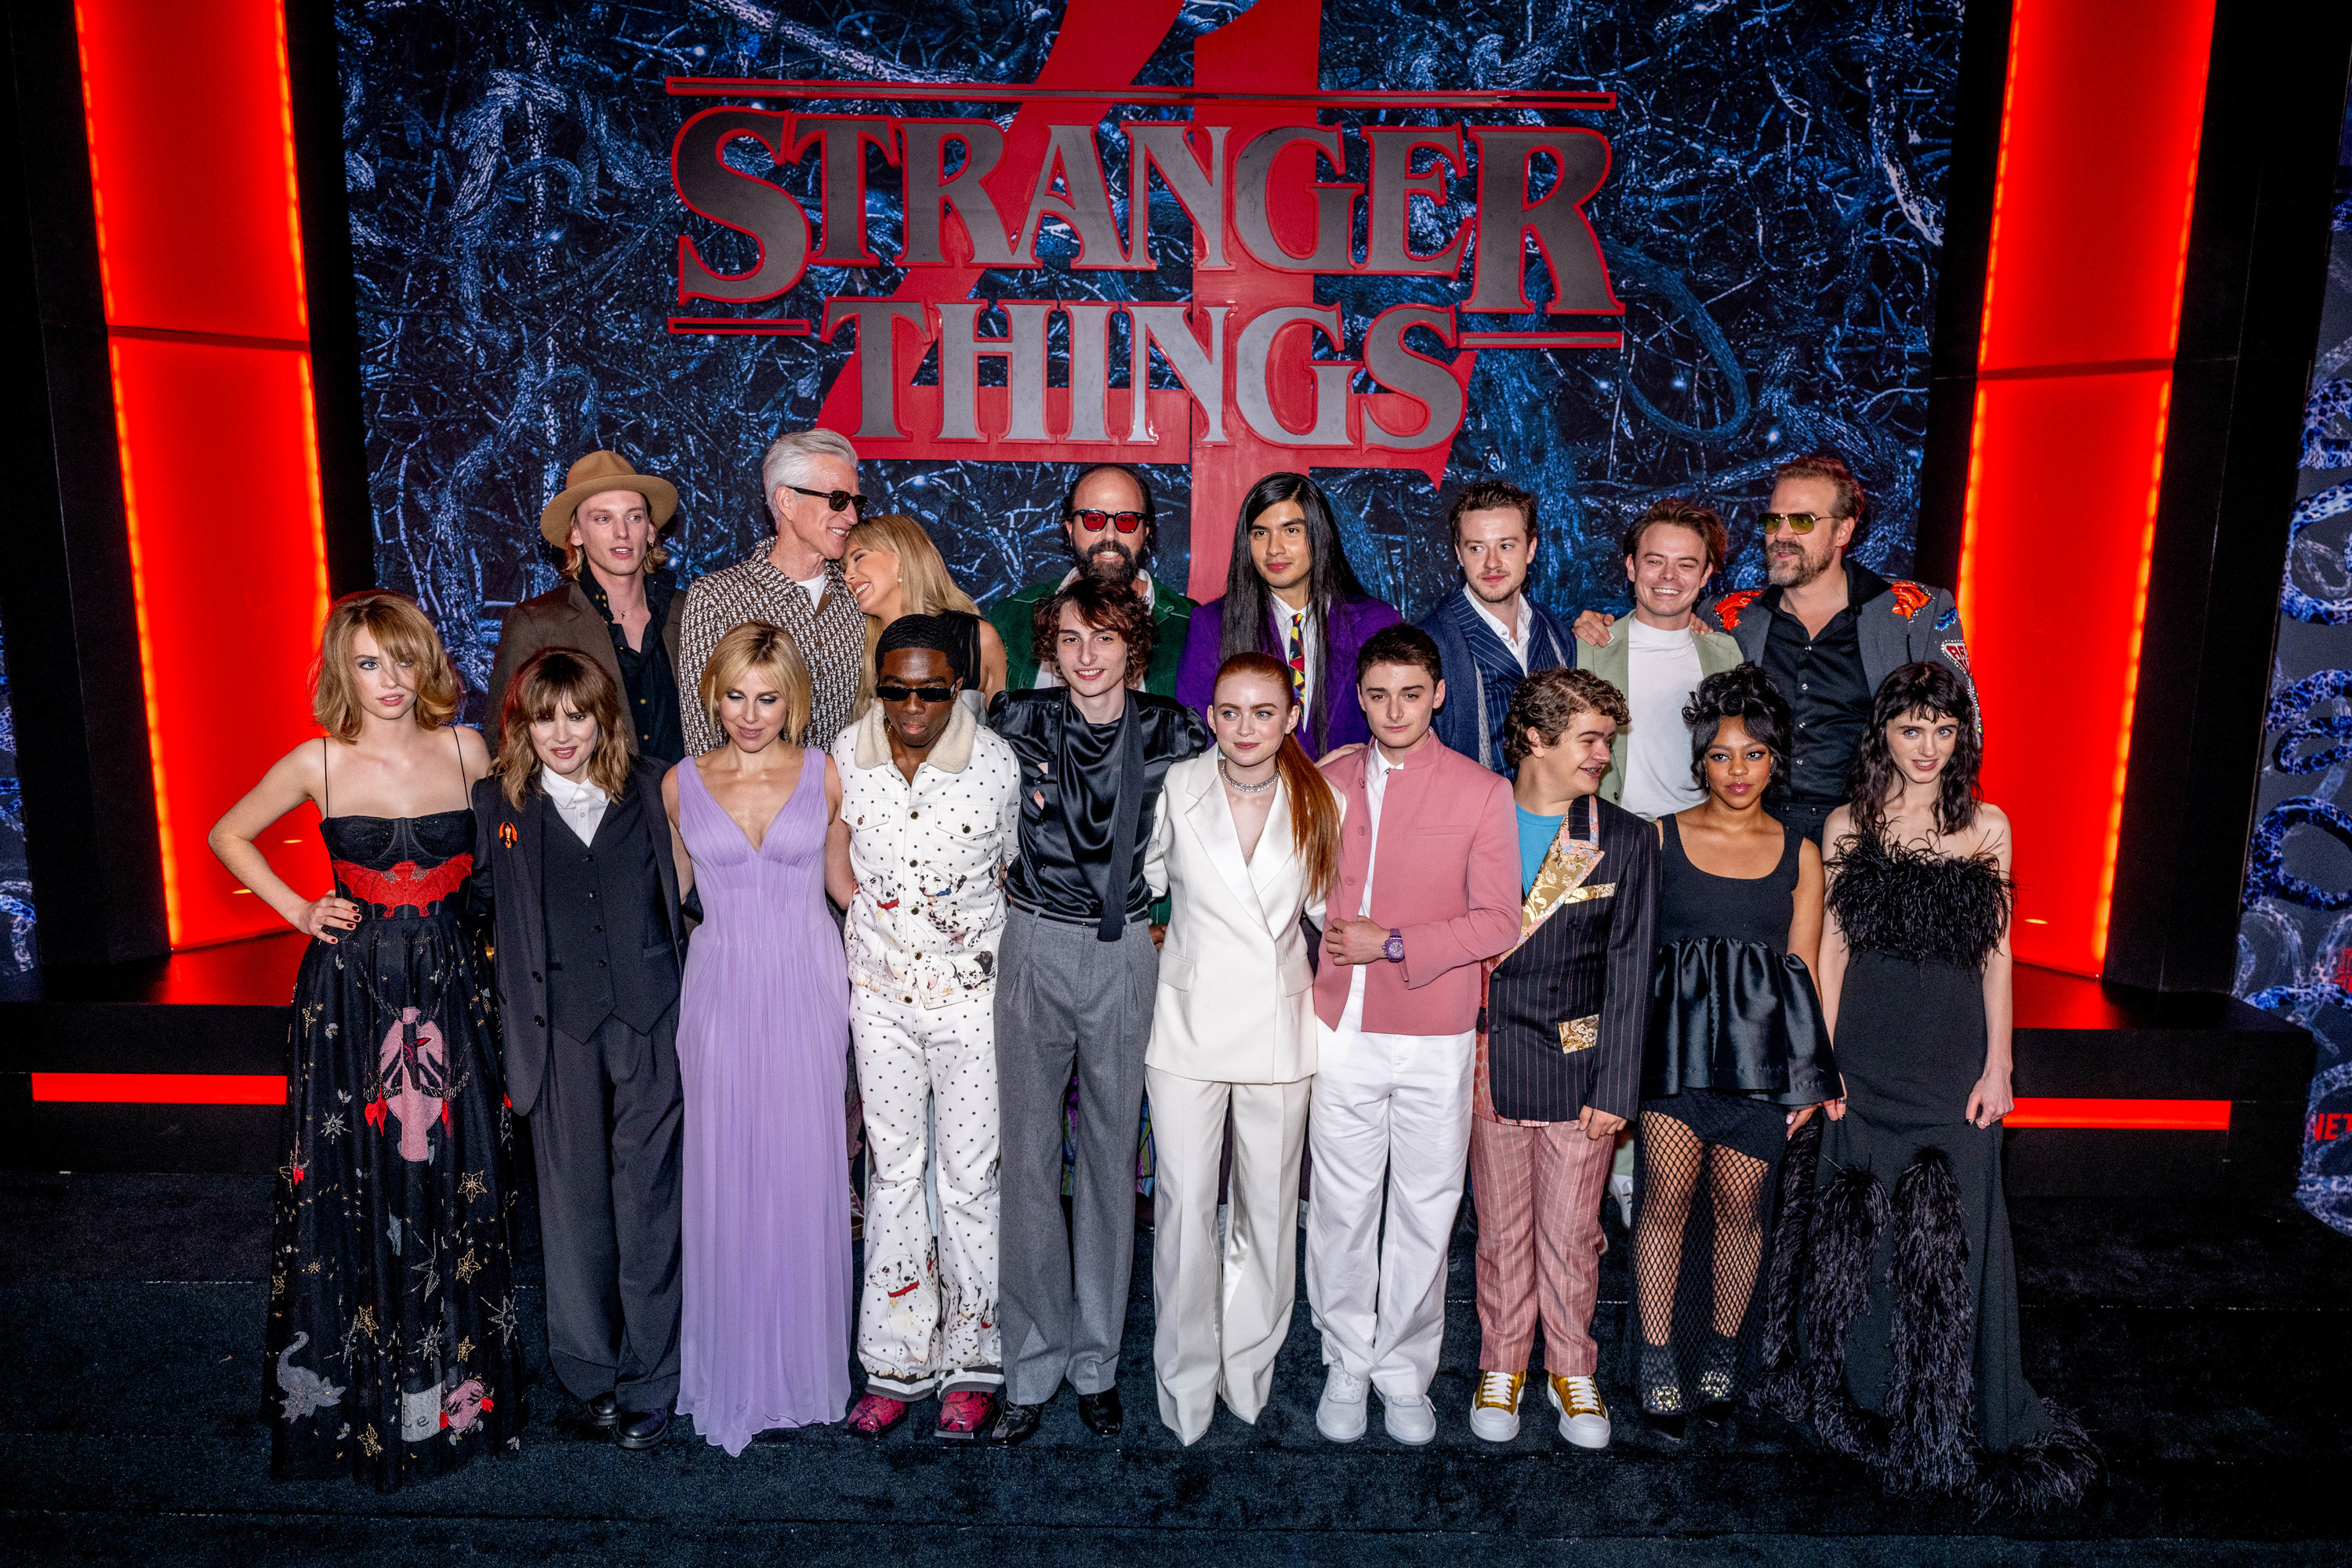 The cast of Stranger Things poses for a photo